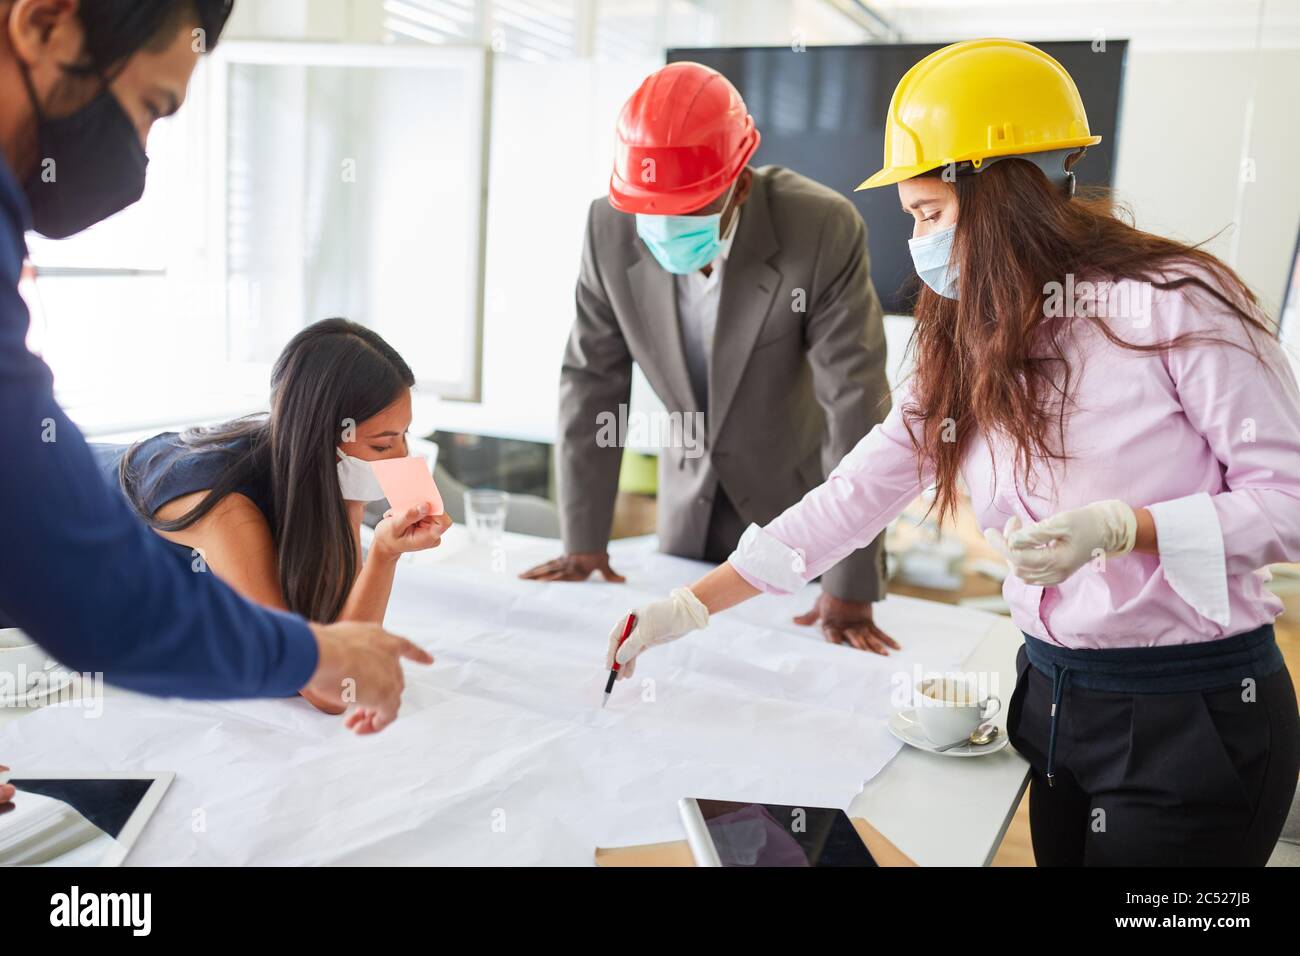 Business people and architects with a mask because of Covid-19 discuss a construction project together Stock Photo